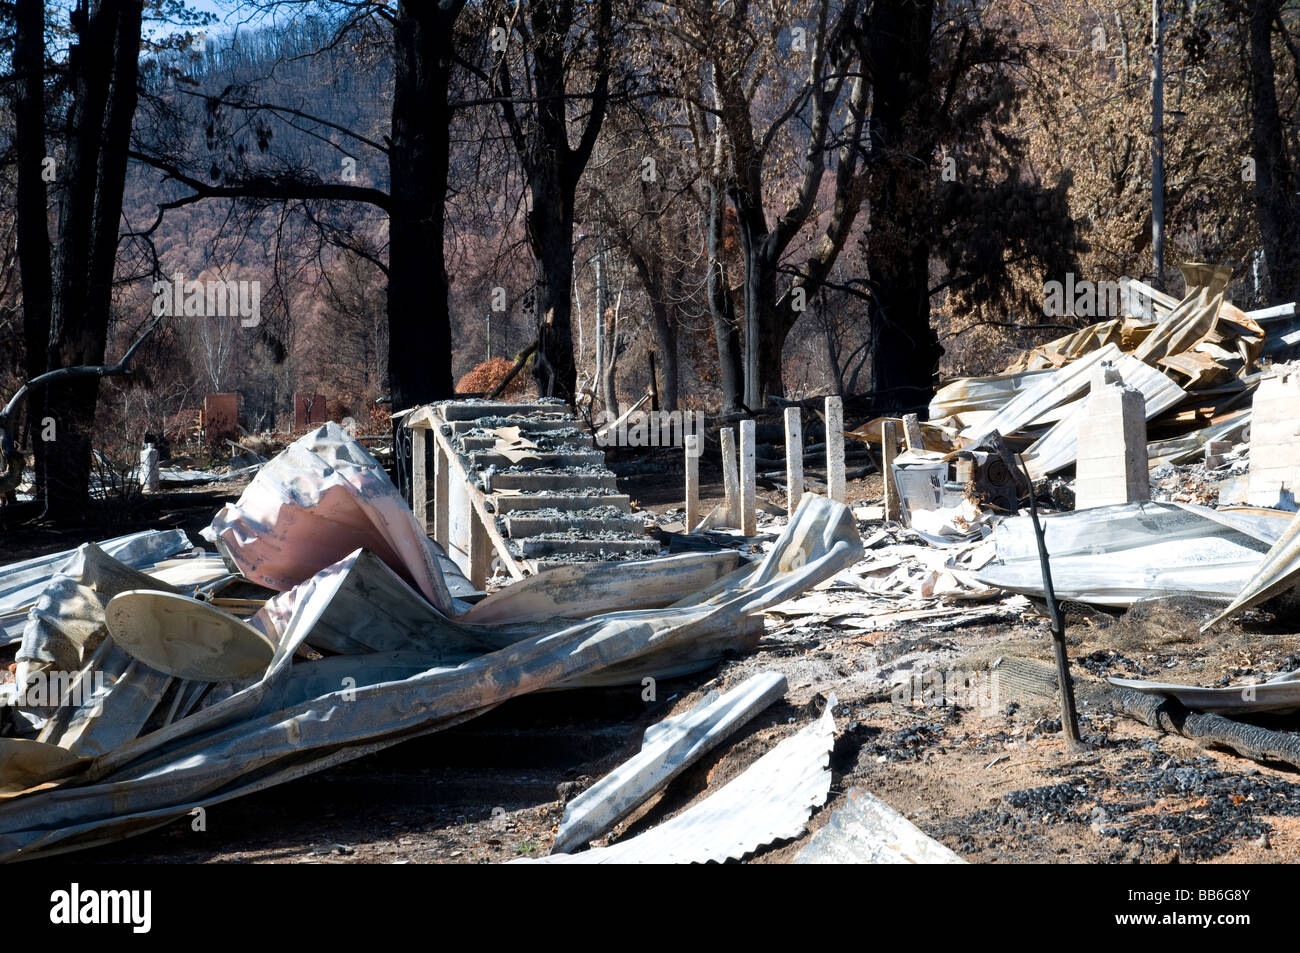 The remains of a home and devastation left after a bushfire Stock Photo